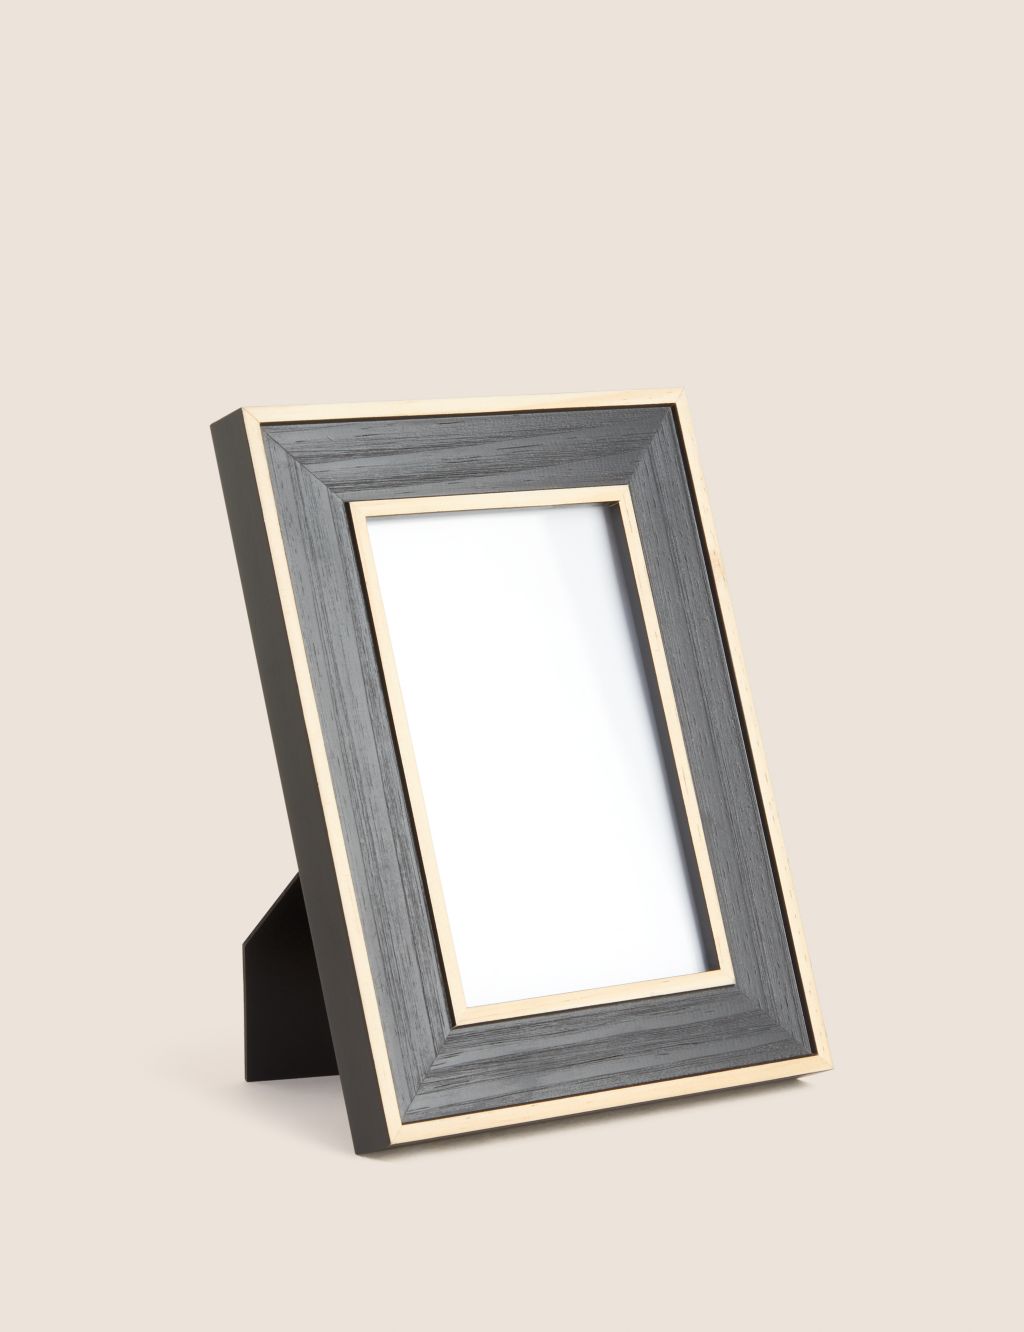 Two Tone Wood Photo Frame 4x6 inch image 1